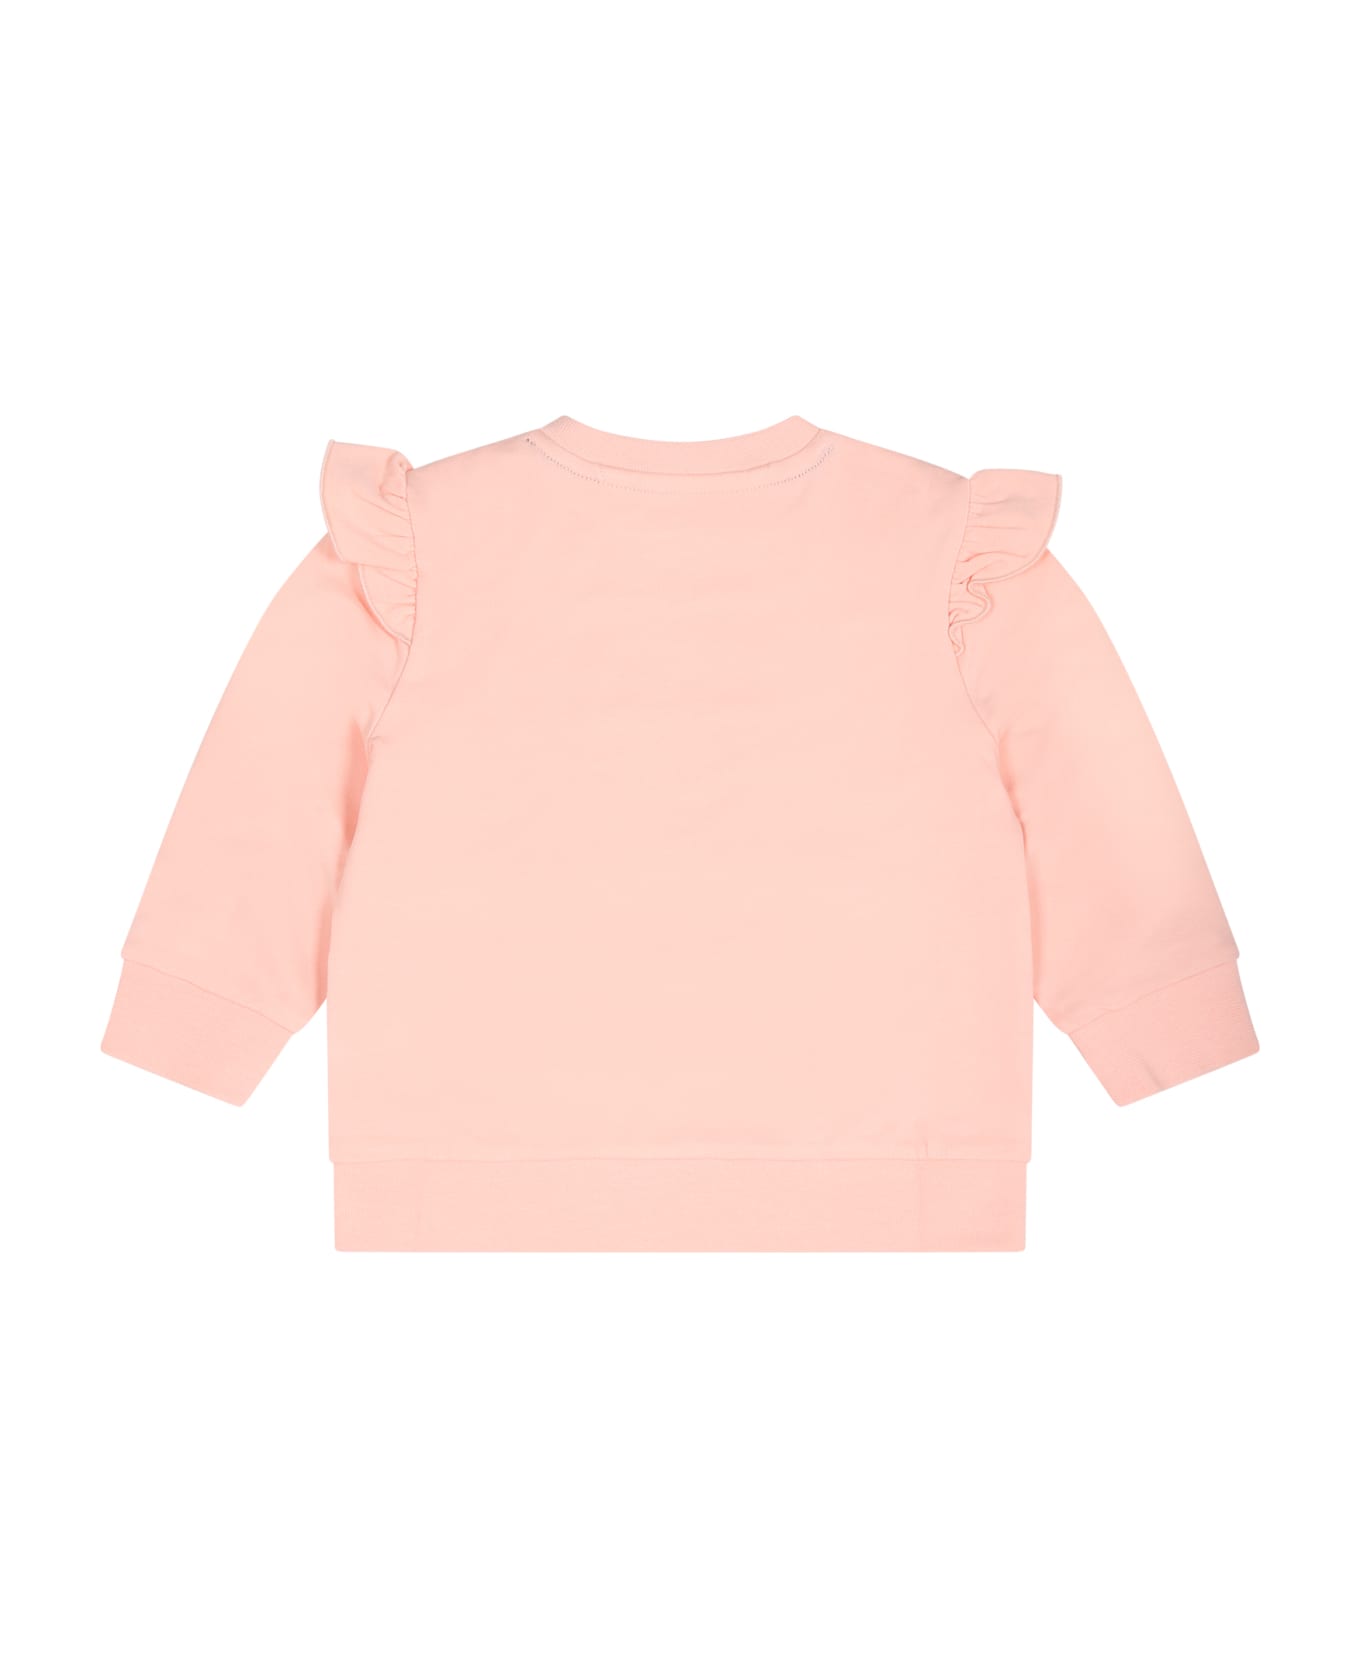 Tommy Hilfiger Pink Swet-shirt For Baby Girl With Monogram - Pink